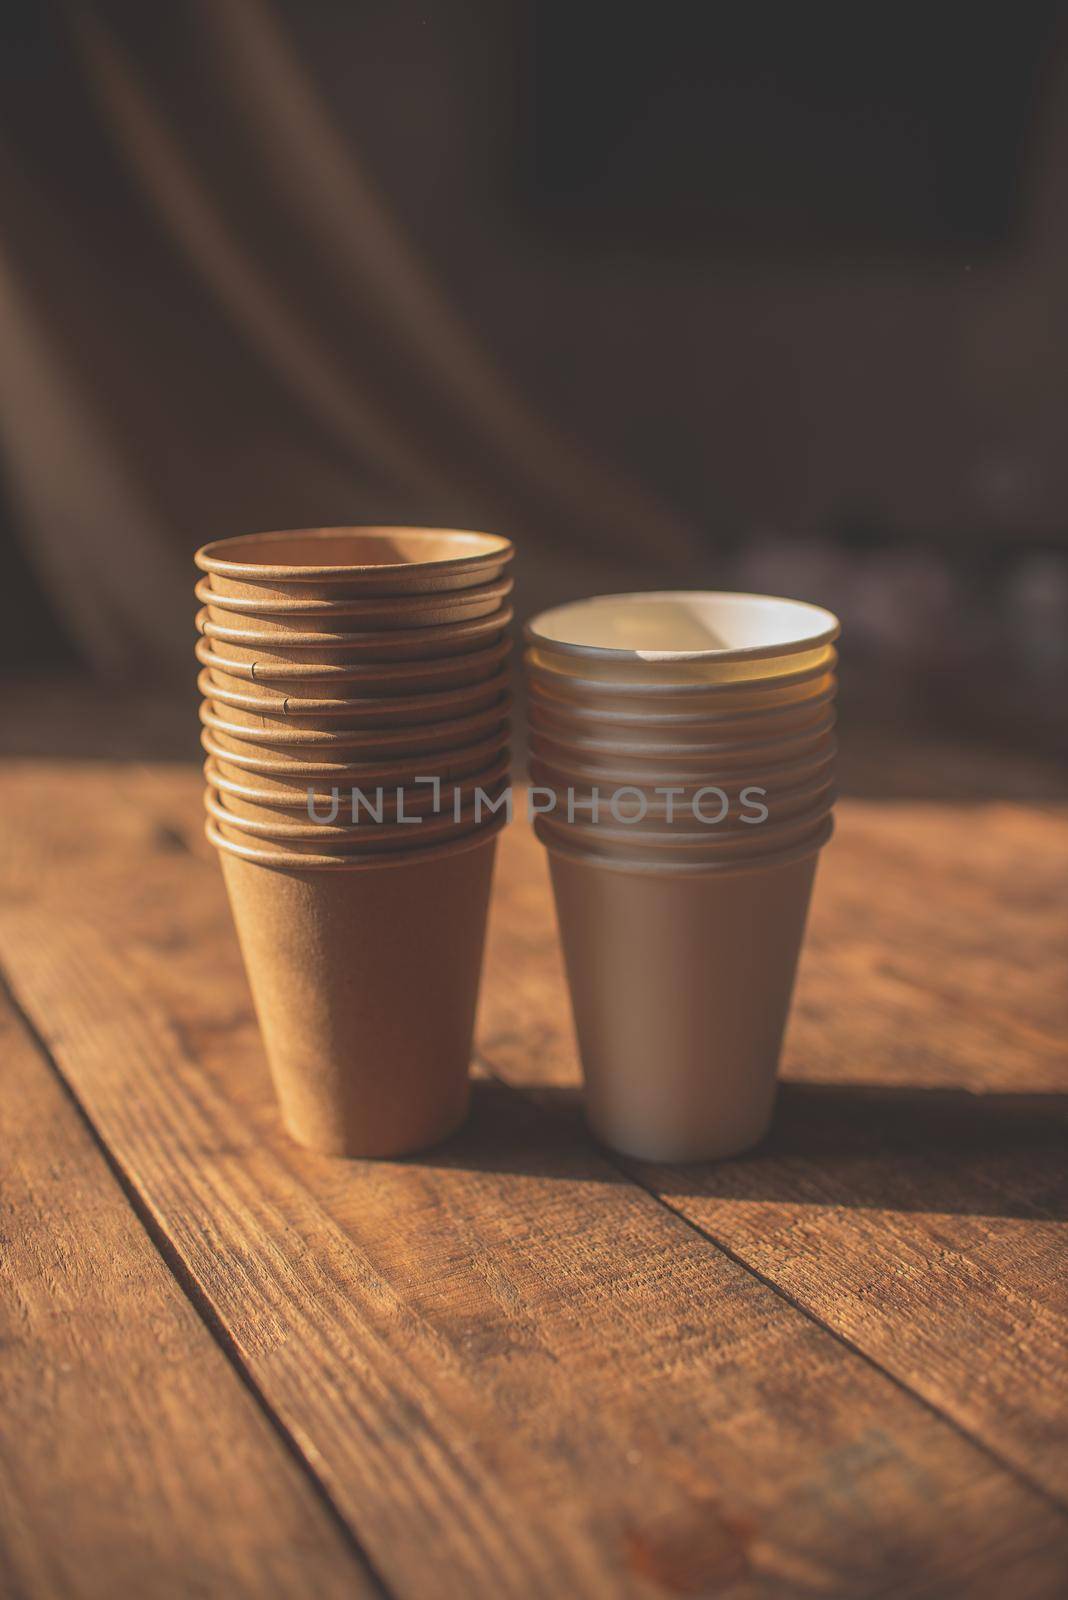 disposable cups made of dark brown paper and white cups stand on wooden table against brown background